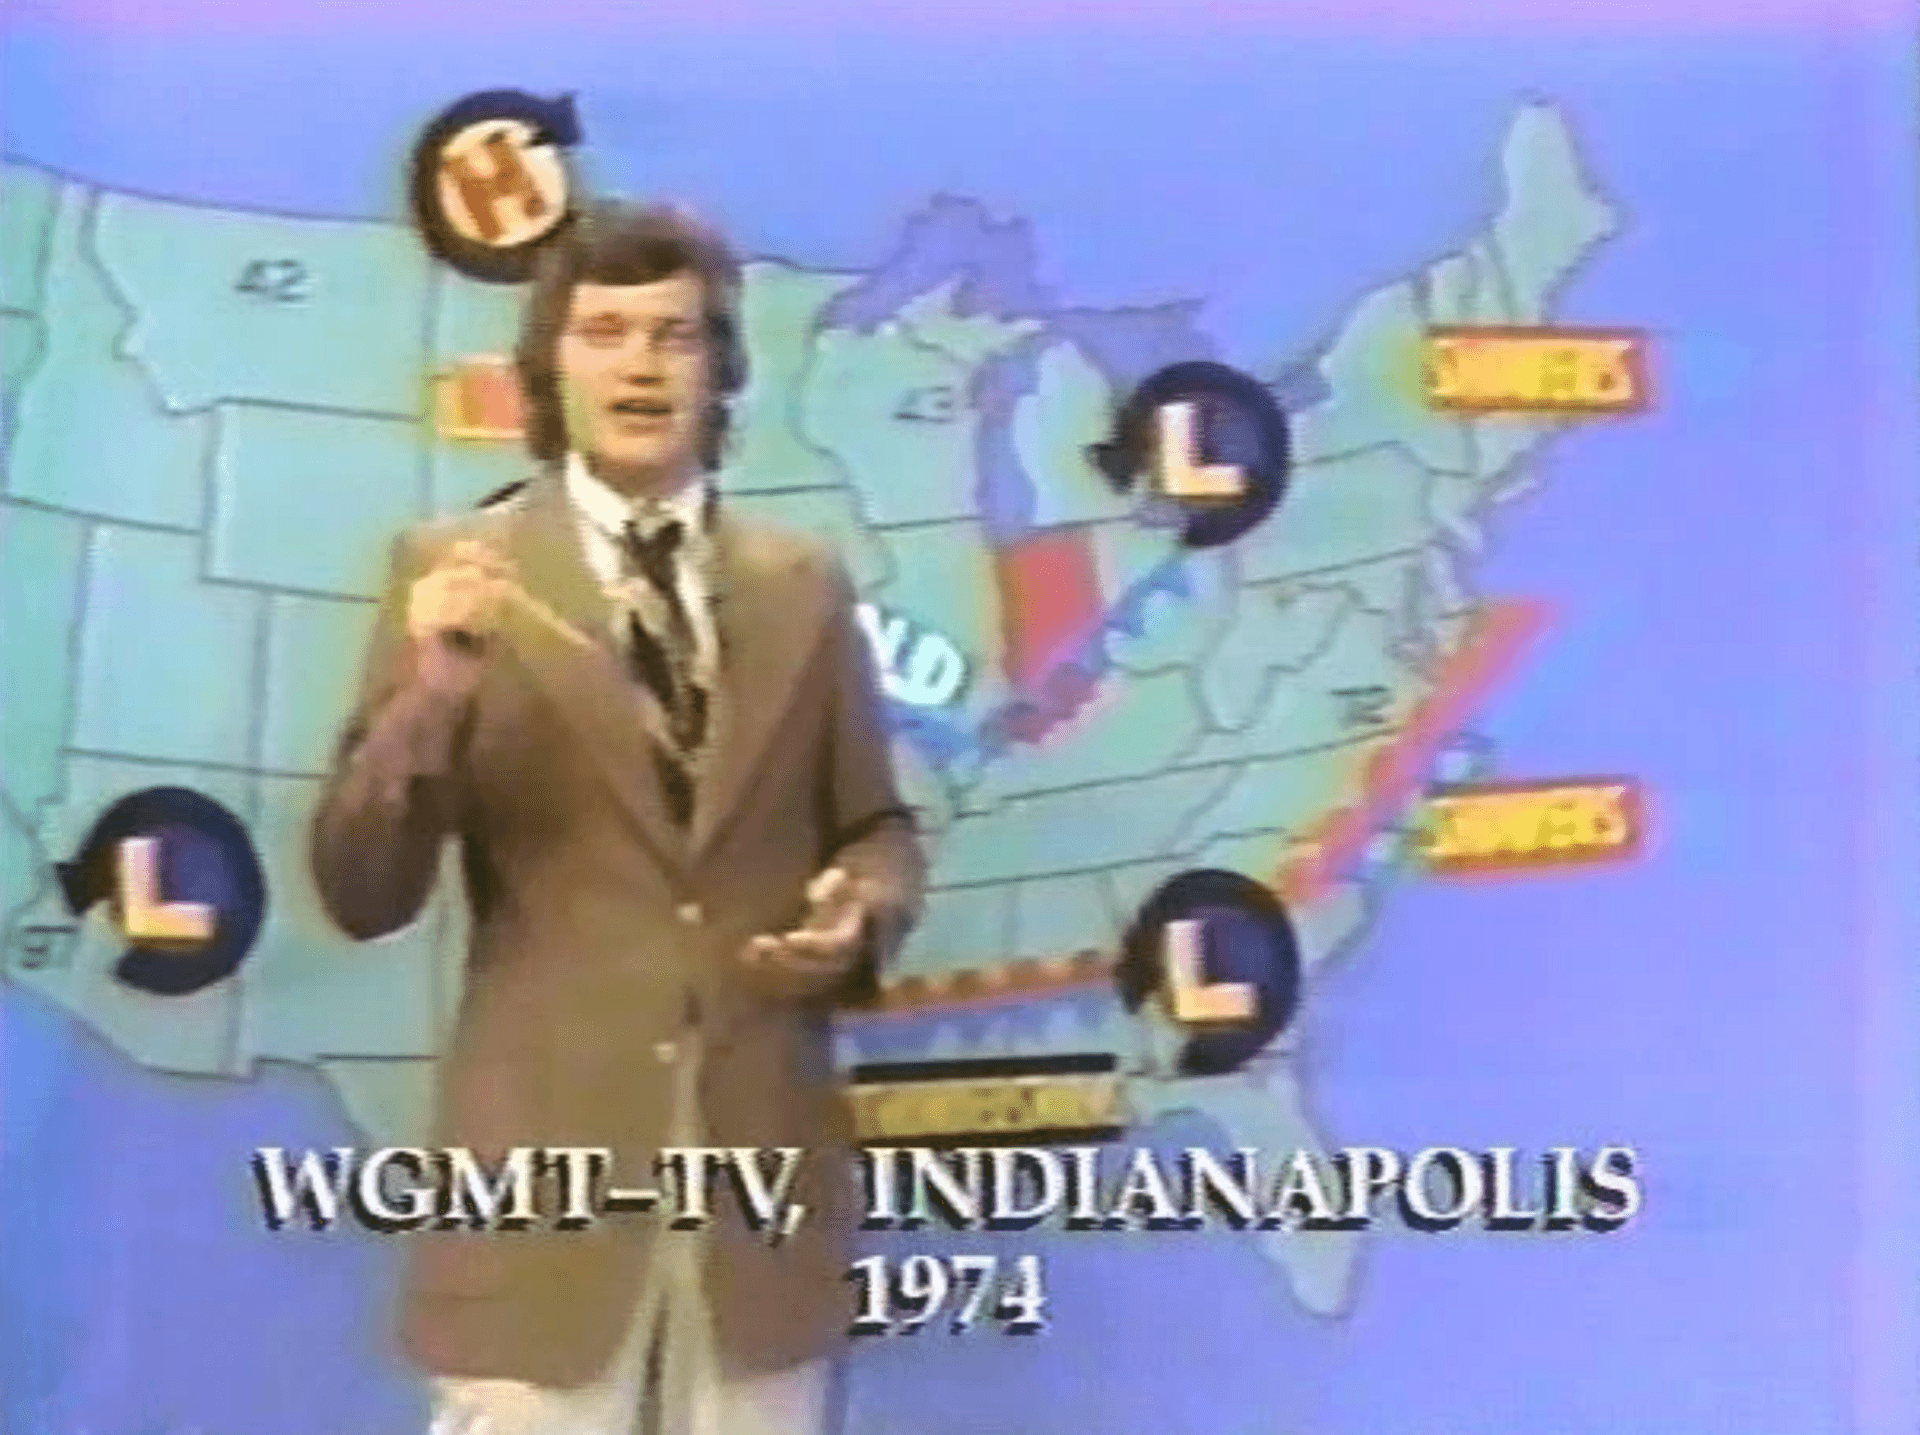 David Letterman in front of weather map